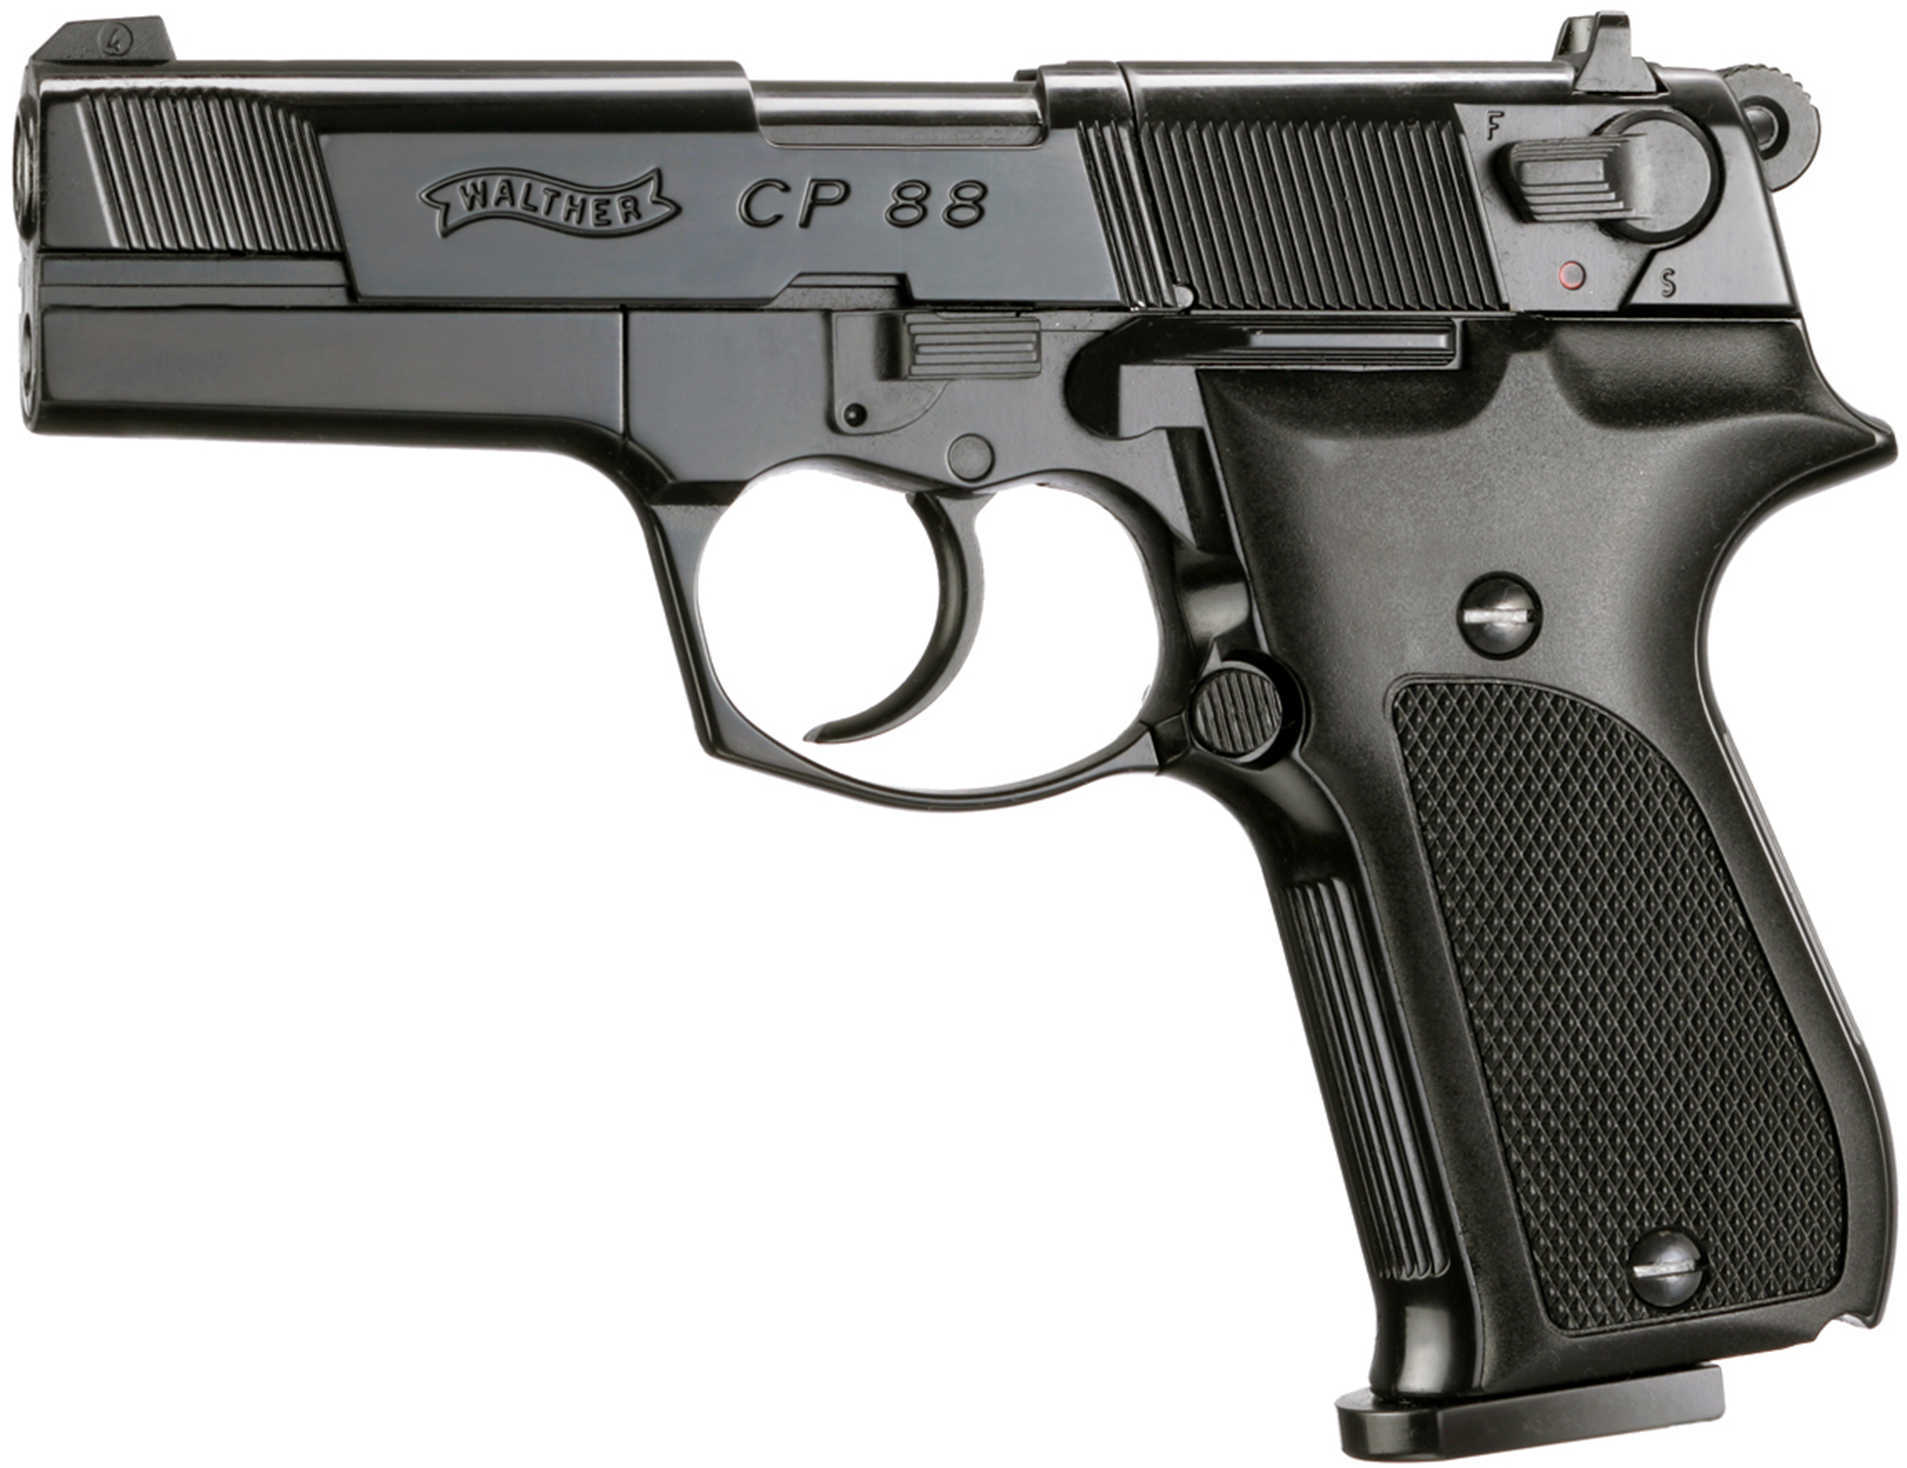 Umarex CP 88 Walther Co2 Pistol .177 Pellet 400Fps 4" Black Synthetic Co2 Box 8Rd 2252050